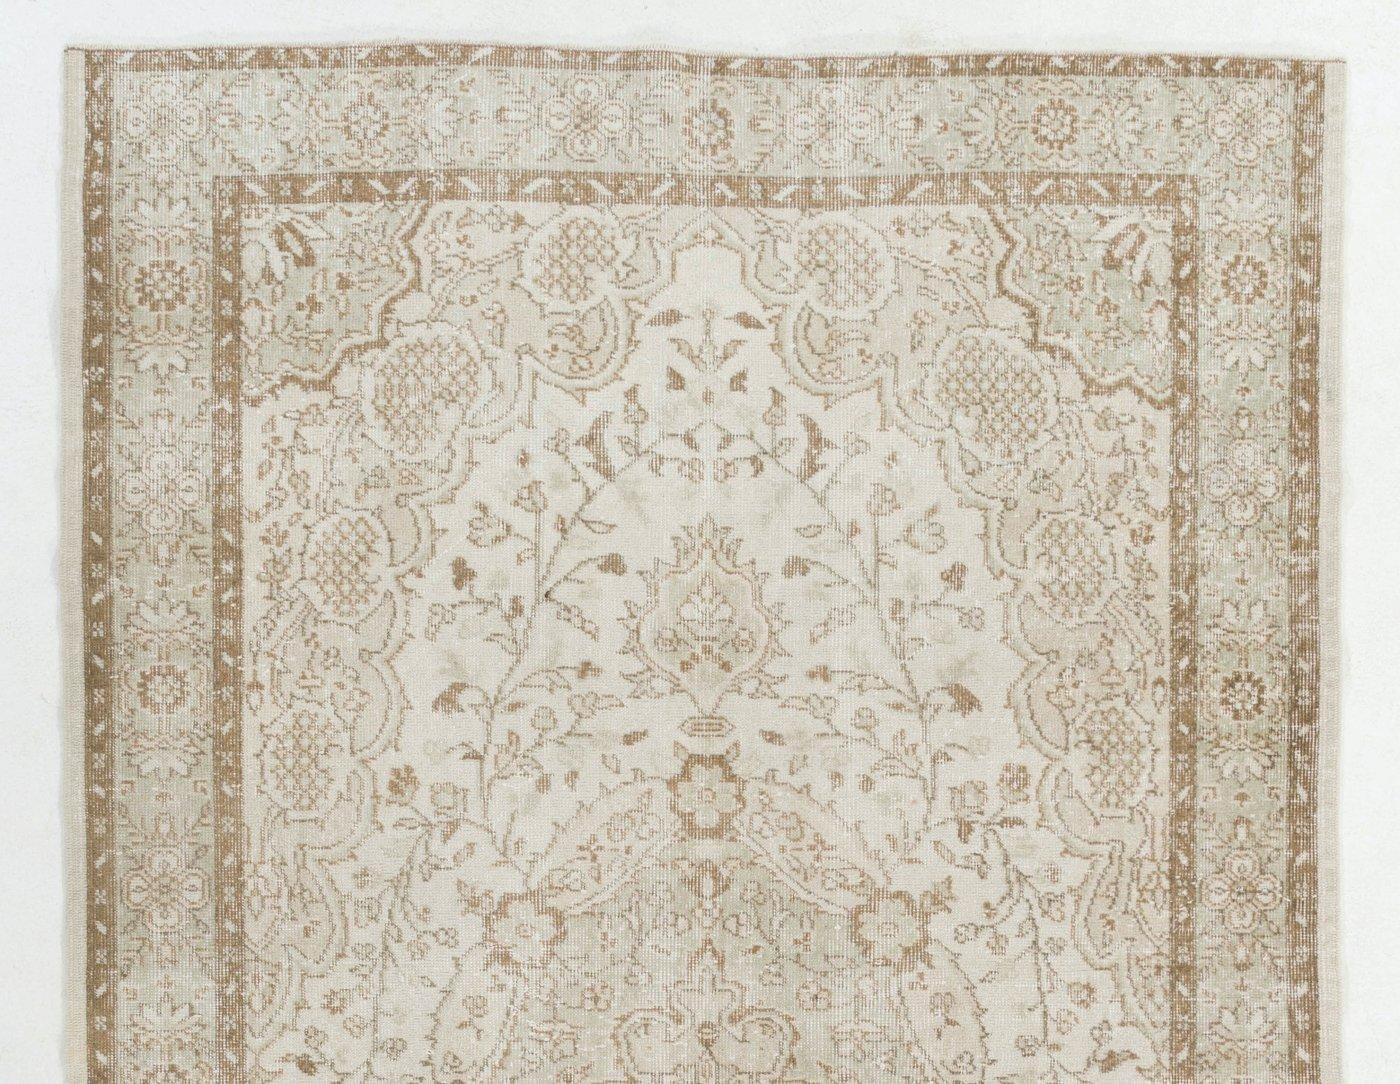 This handmade vintage Turkish Oushak area rug was hand-knotted in the 1960s with distressed low wool pile on cotton foundation. The rug has a central medallion on a field decorated with lush scrolling floral vines and pomegranates in a muted color